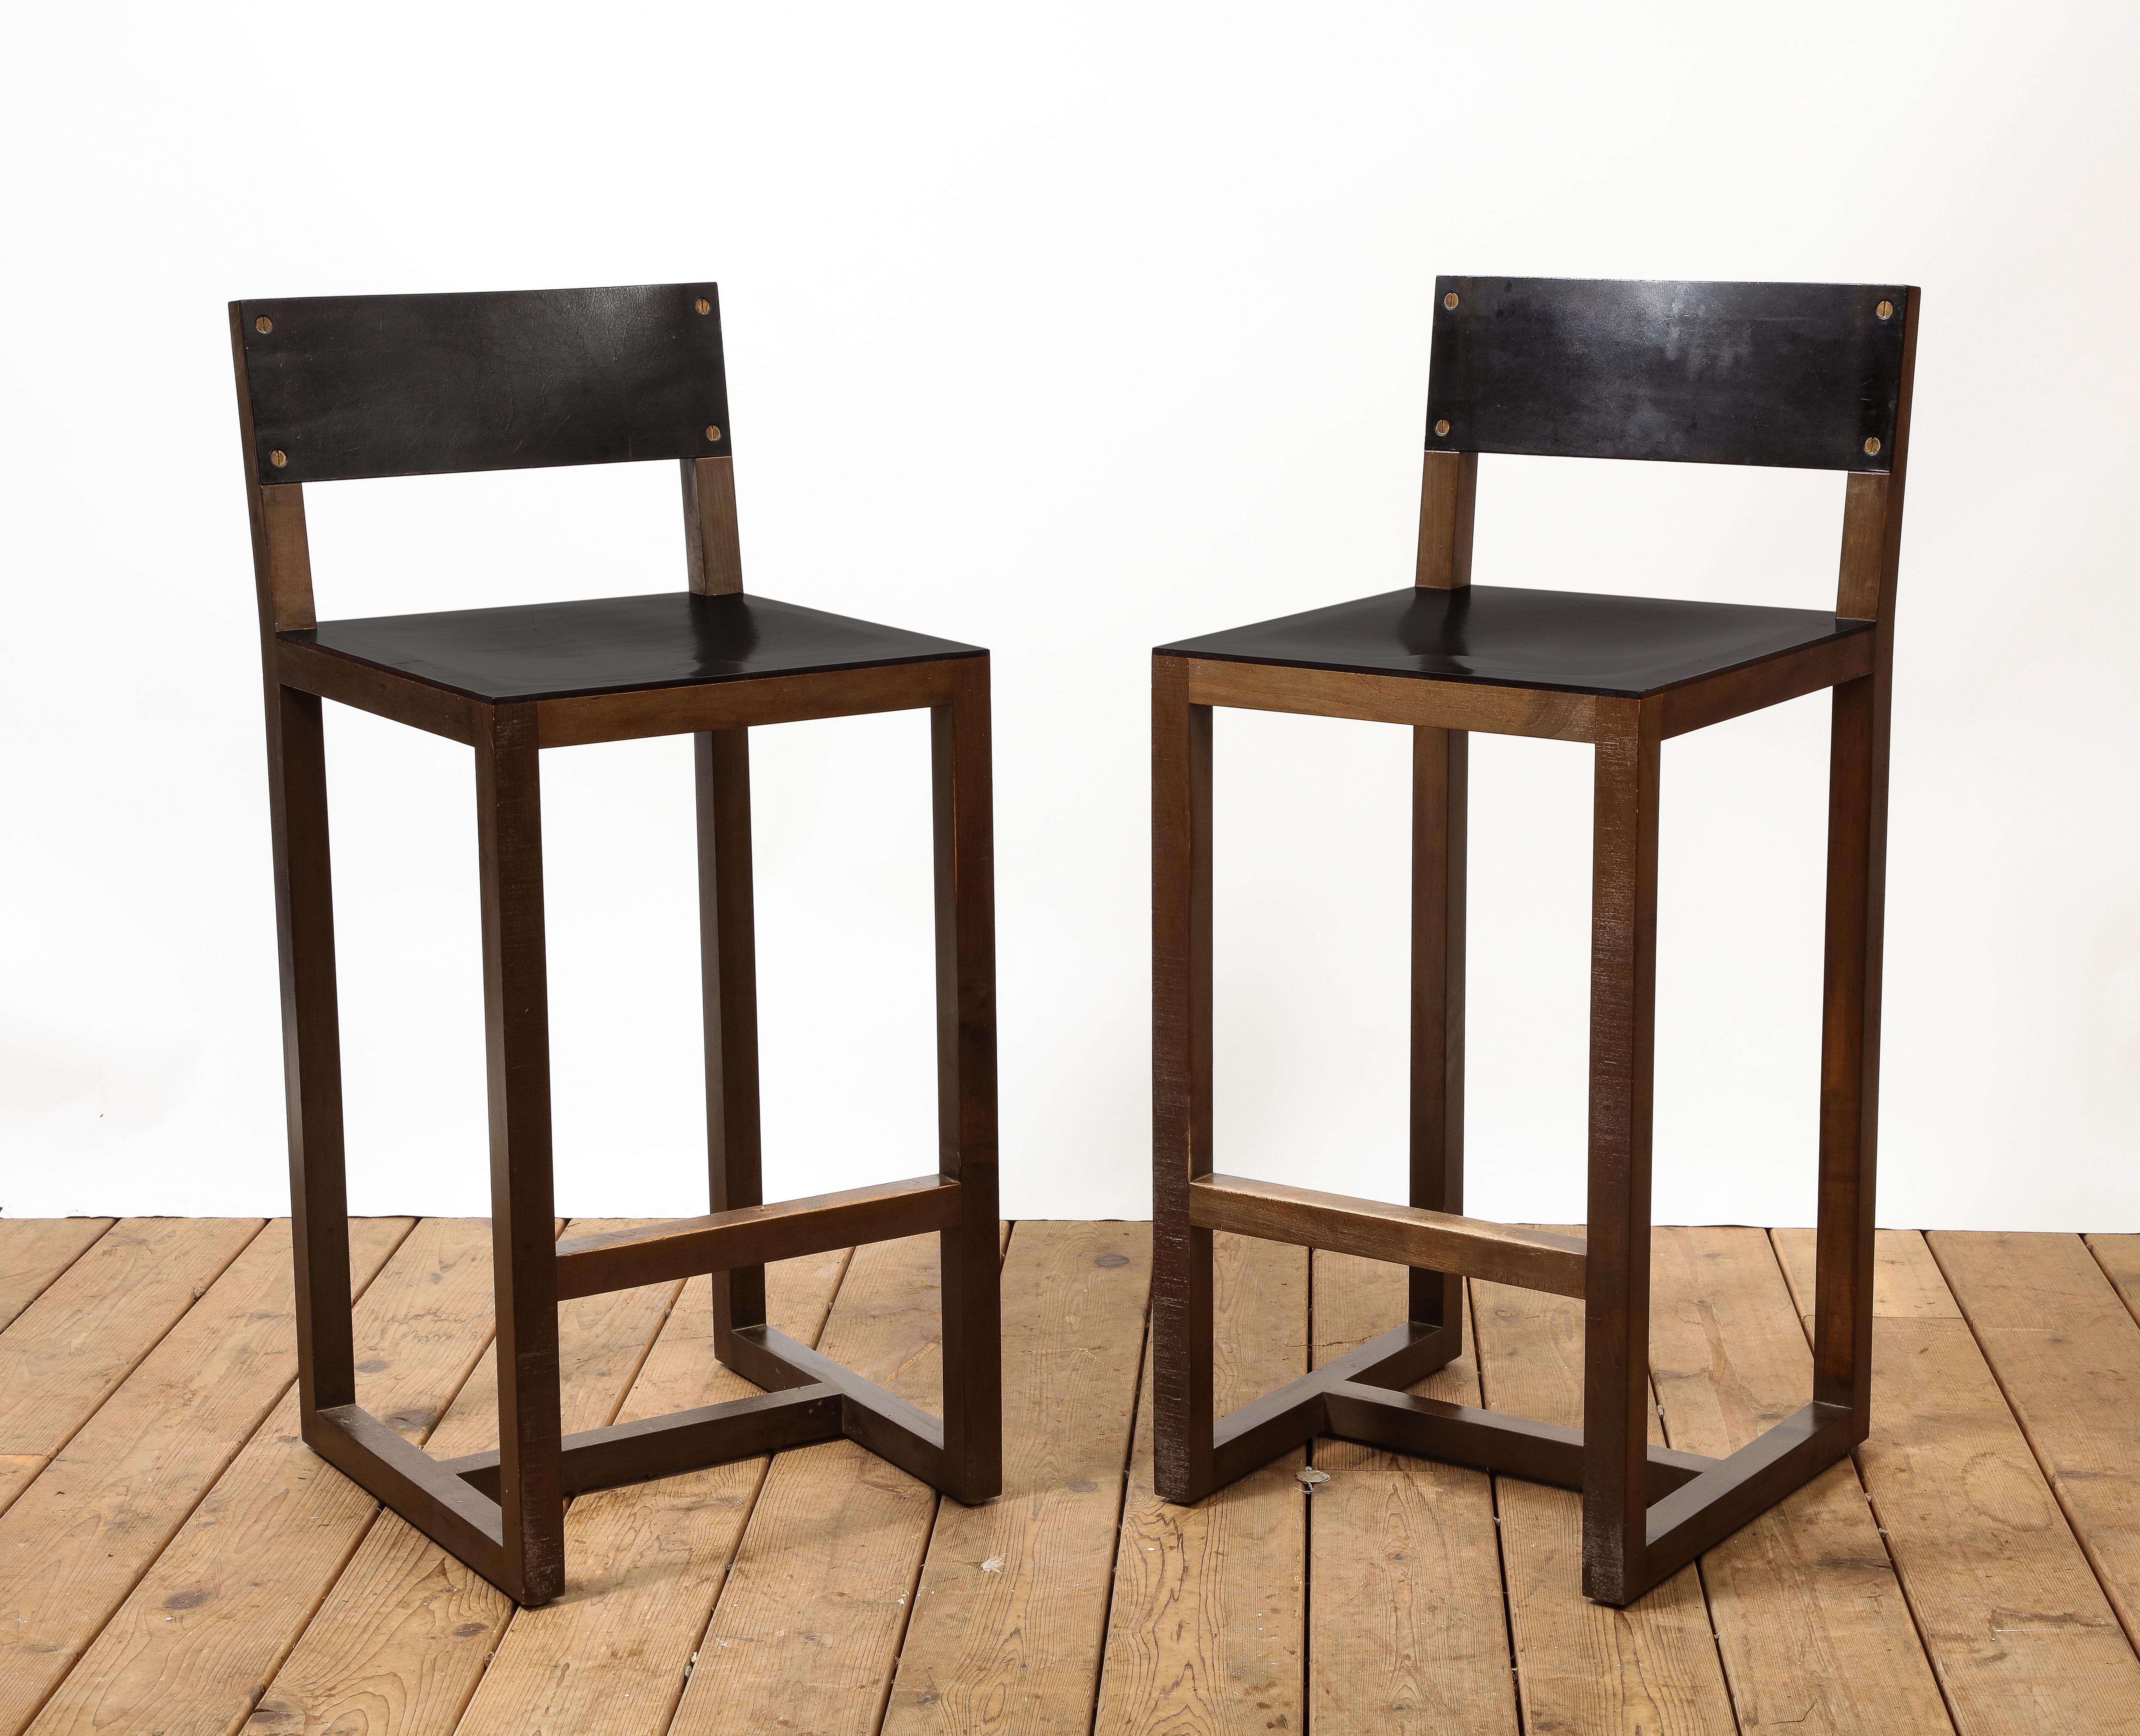 Pair of BDDW square guest counter height wood bar stools with dark brown leather seats and backs. Comfortable footrest. 